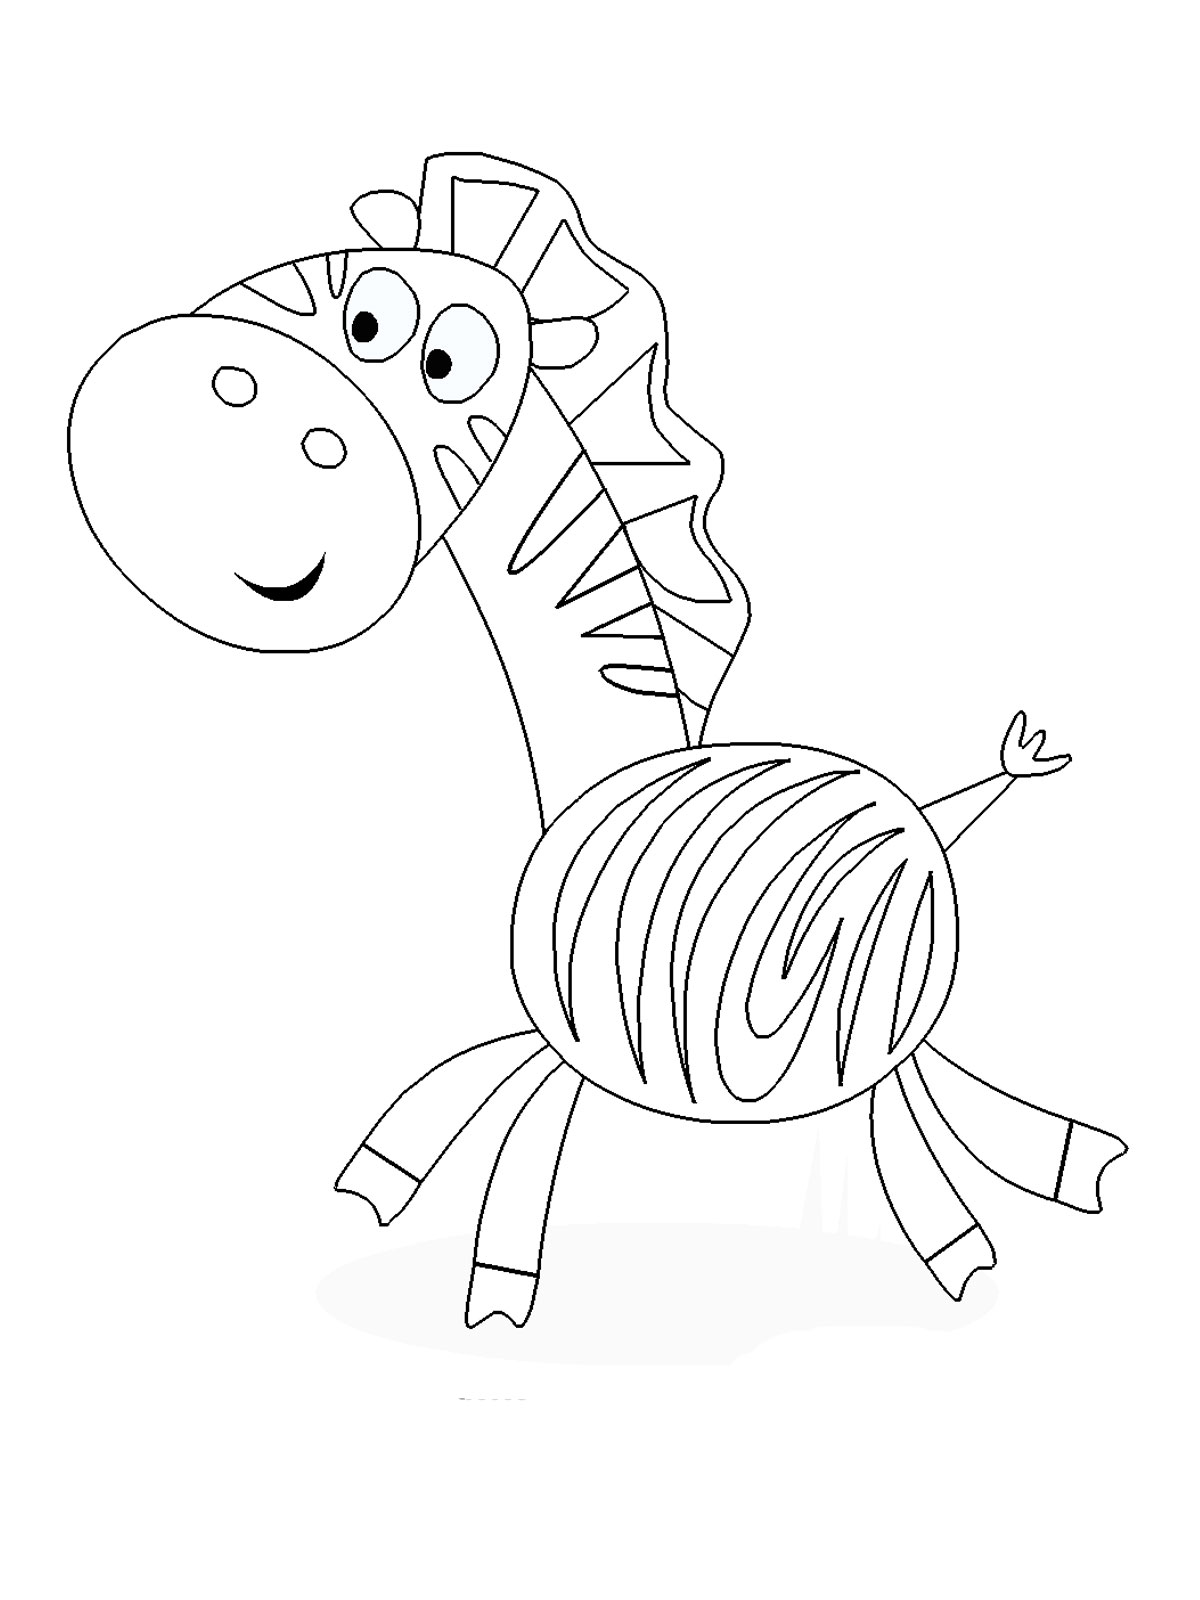  Printable Coloring Page For Kids 1